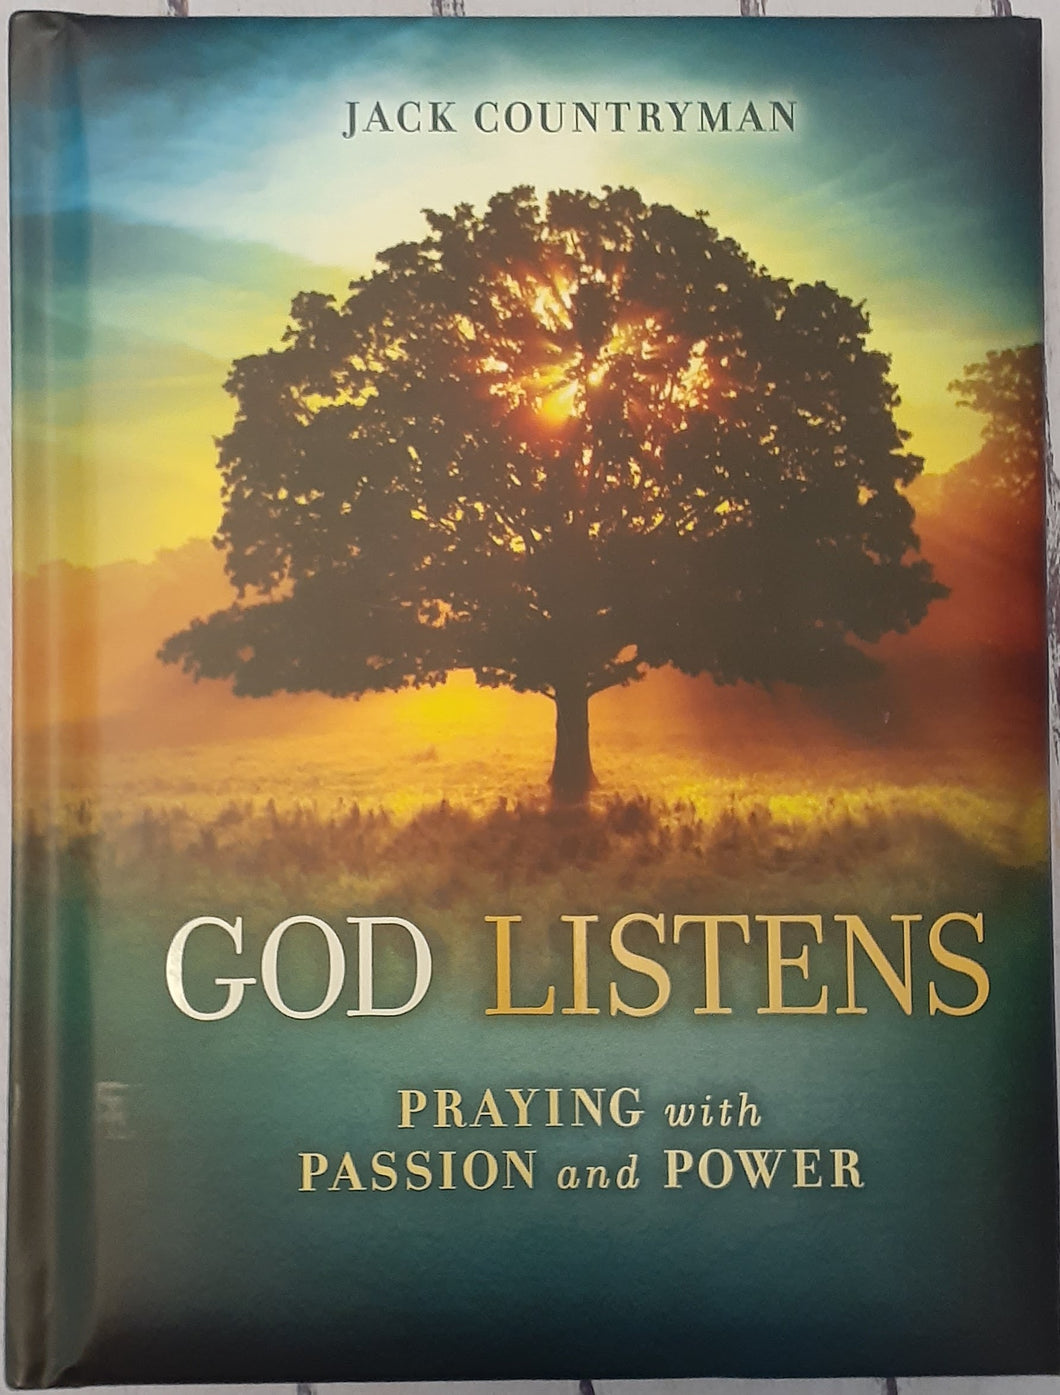 God Listens - Praying with Passion and Power